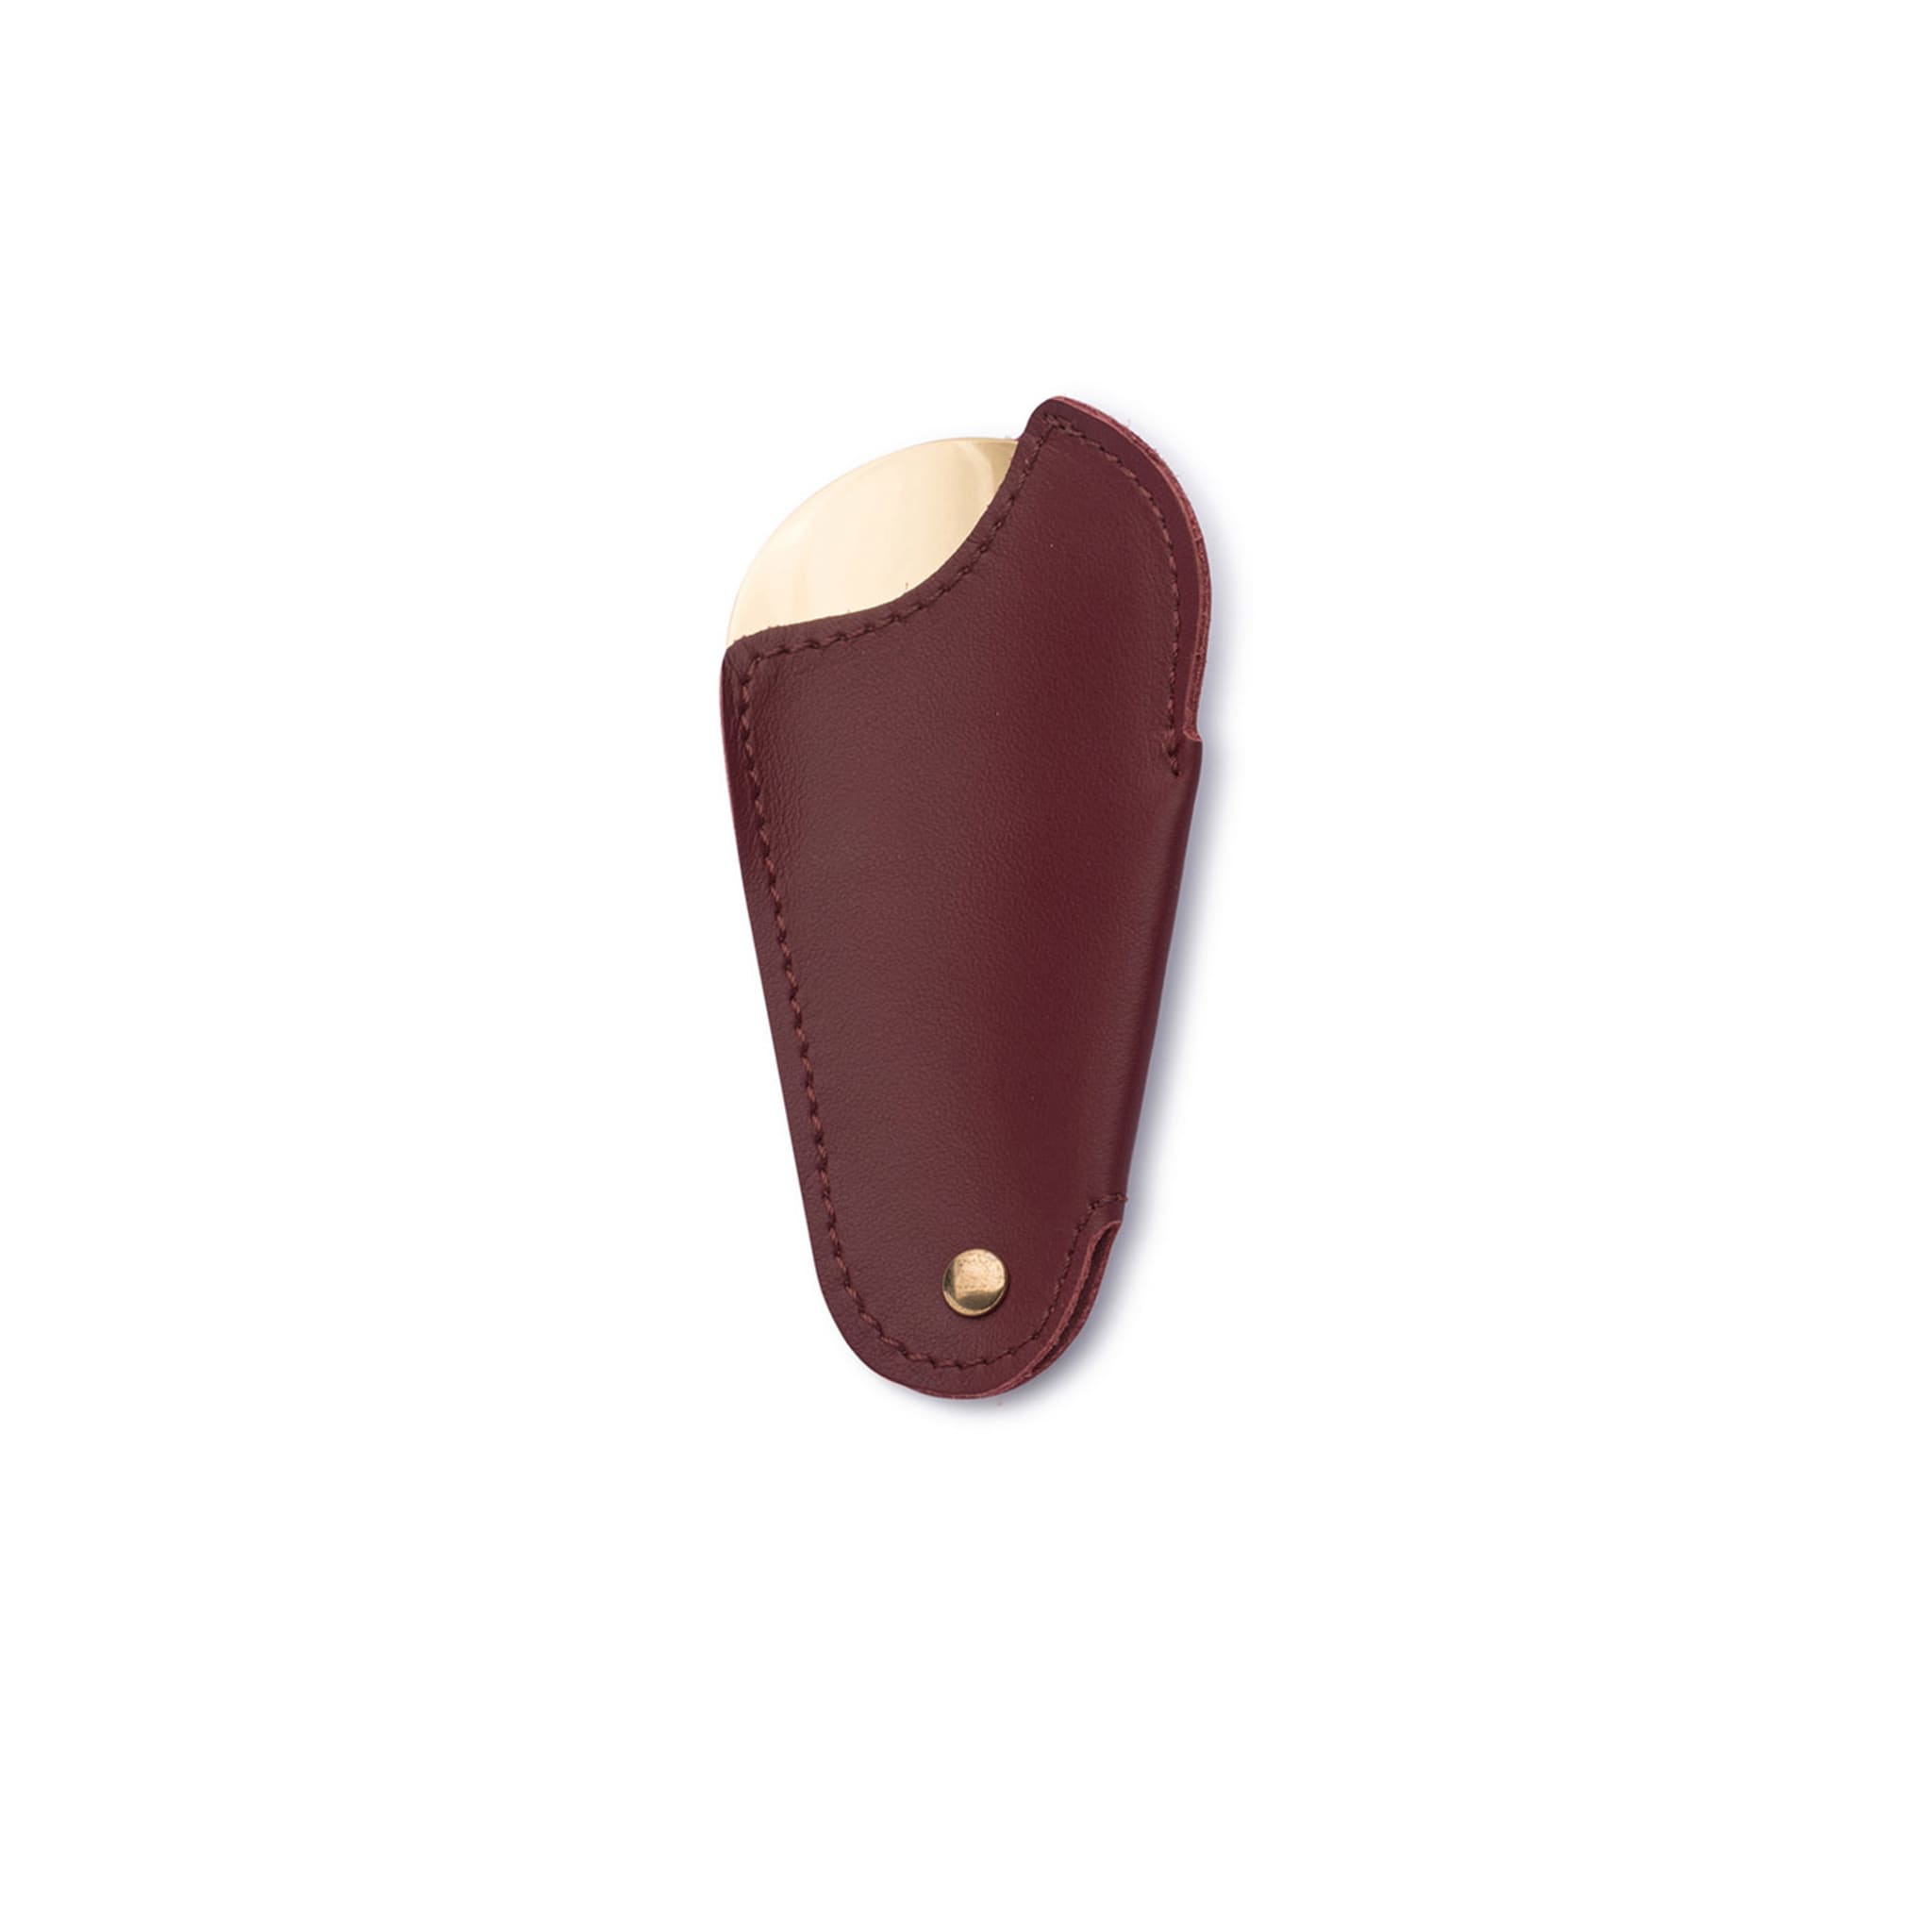 Burgundy & Gold Leather Travel Shoe Horn - Alternative view 2